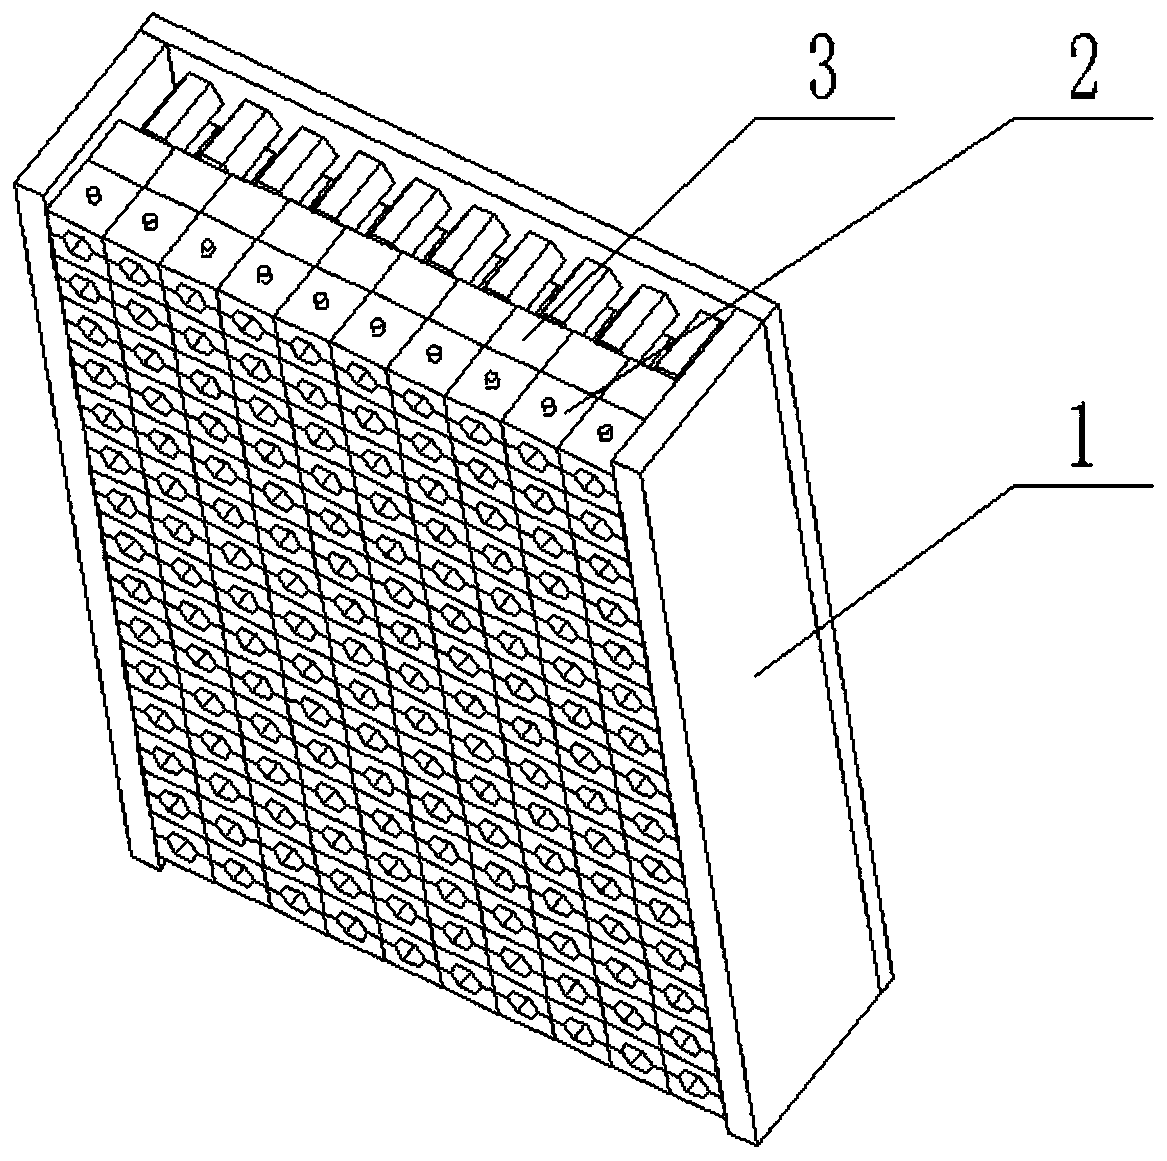 A sound-absorbing and noise-reducing device